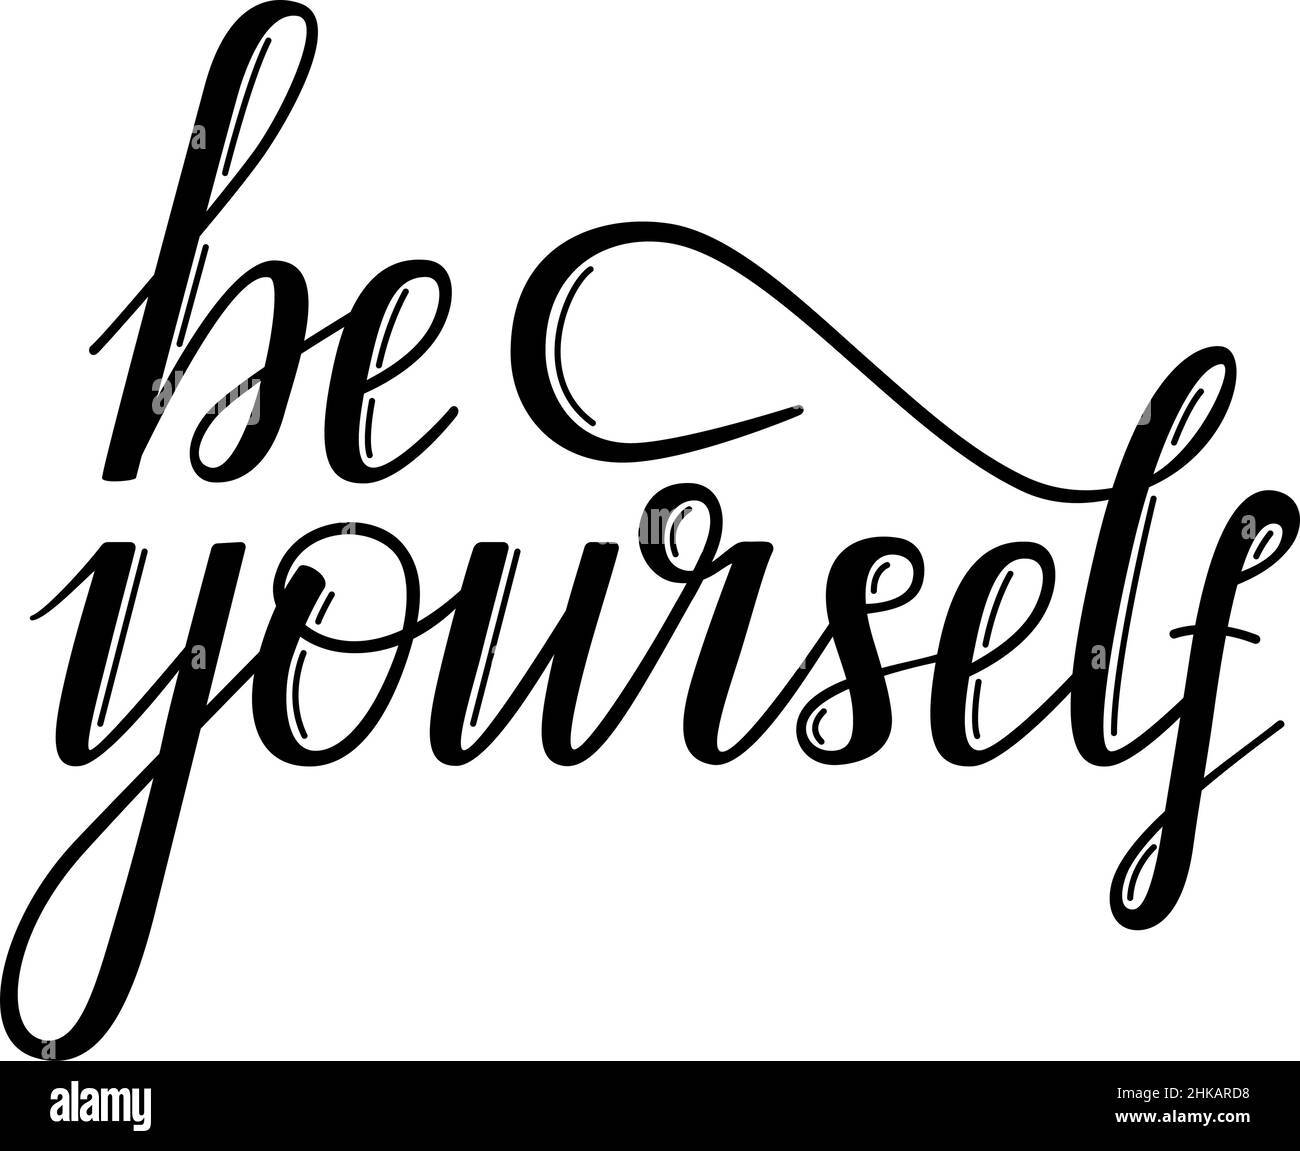 Be yourself, inspirational phrase, hand lettering, vector illustration Stock Vector